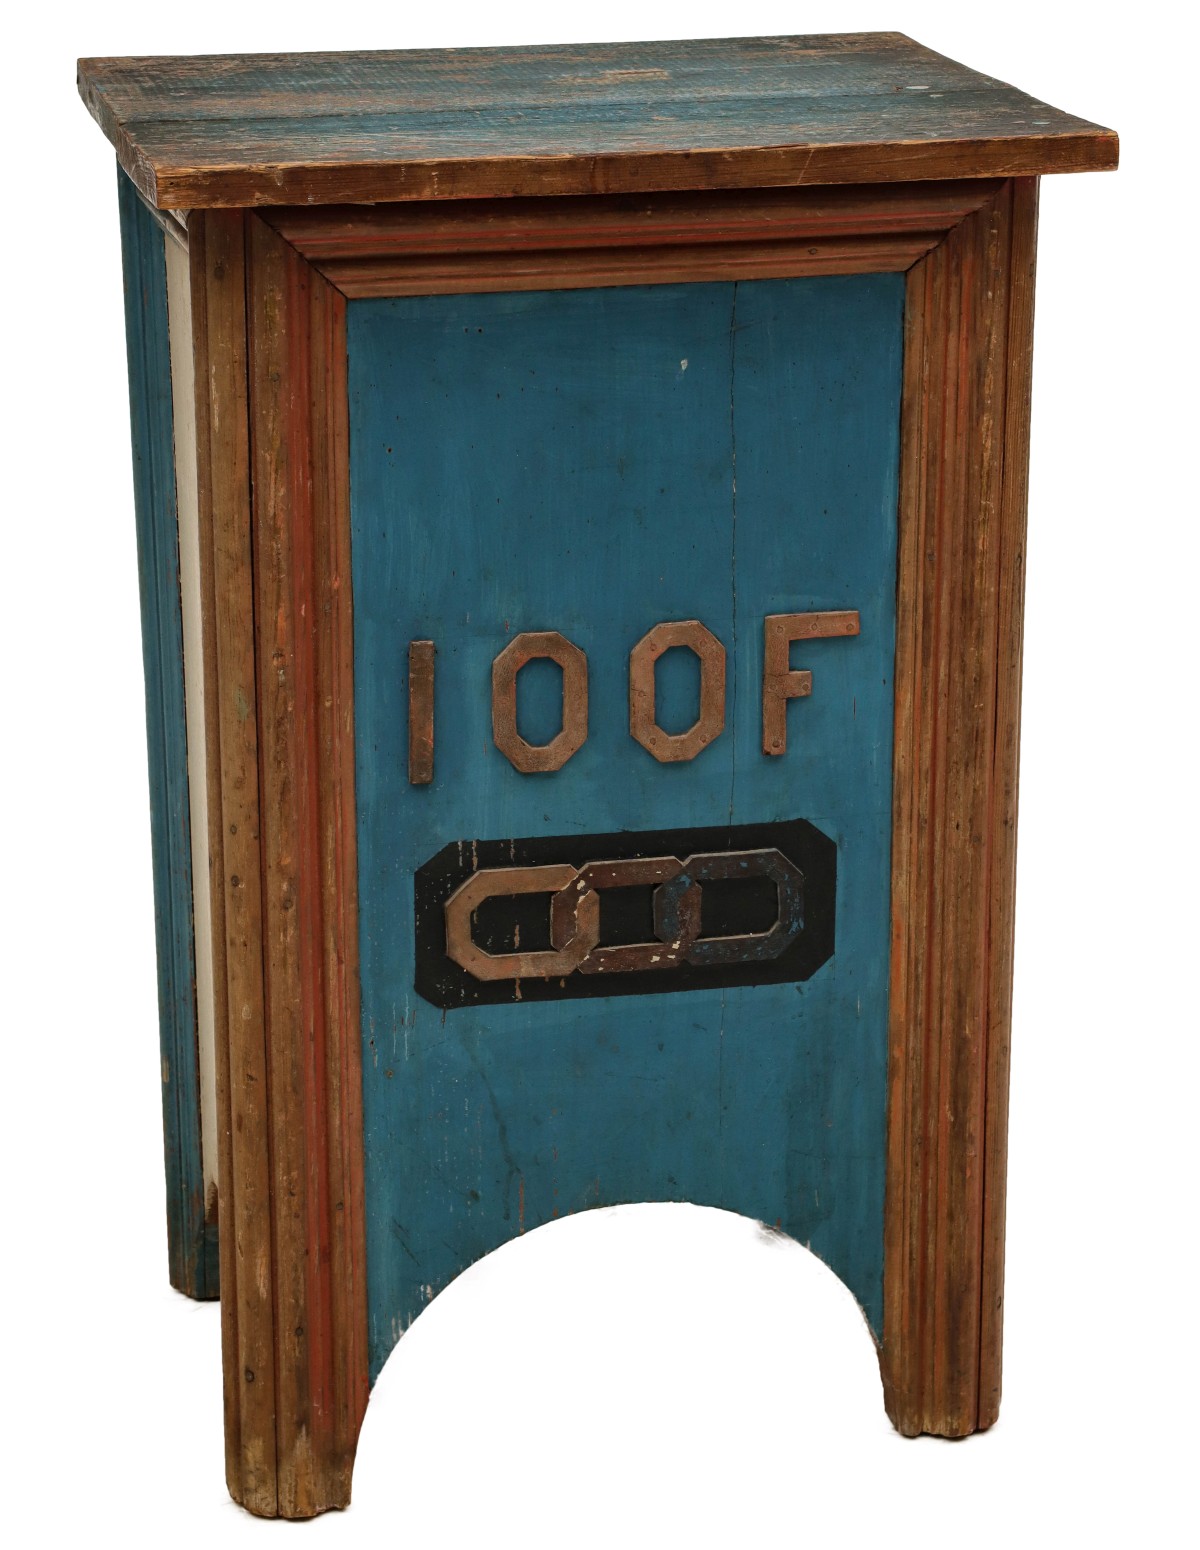 A PAINTED FRATERNAL ORDER LECTERN CIRCA 1890